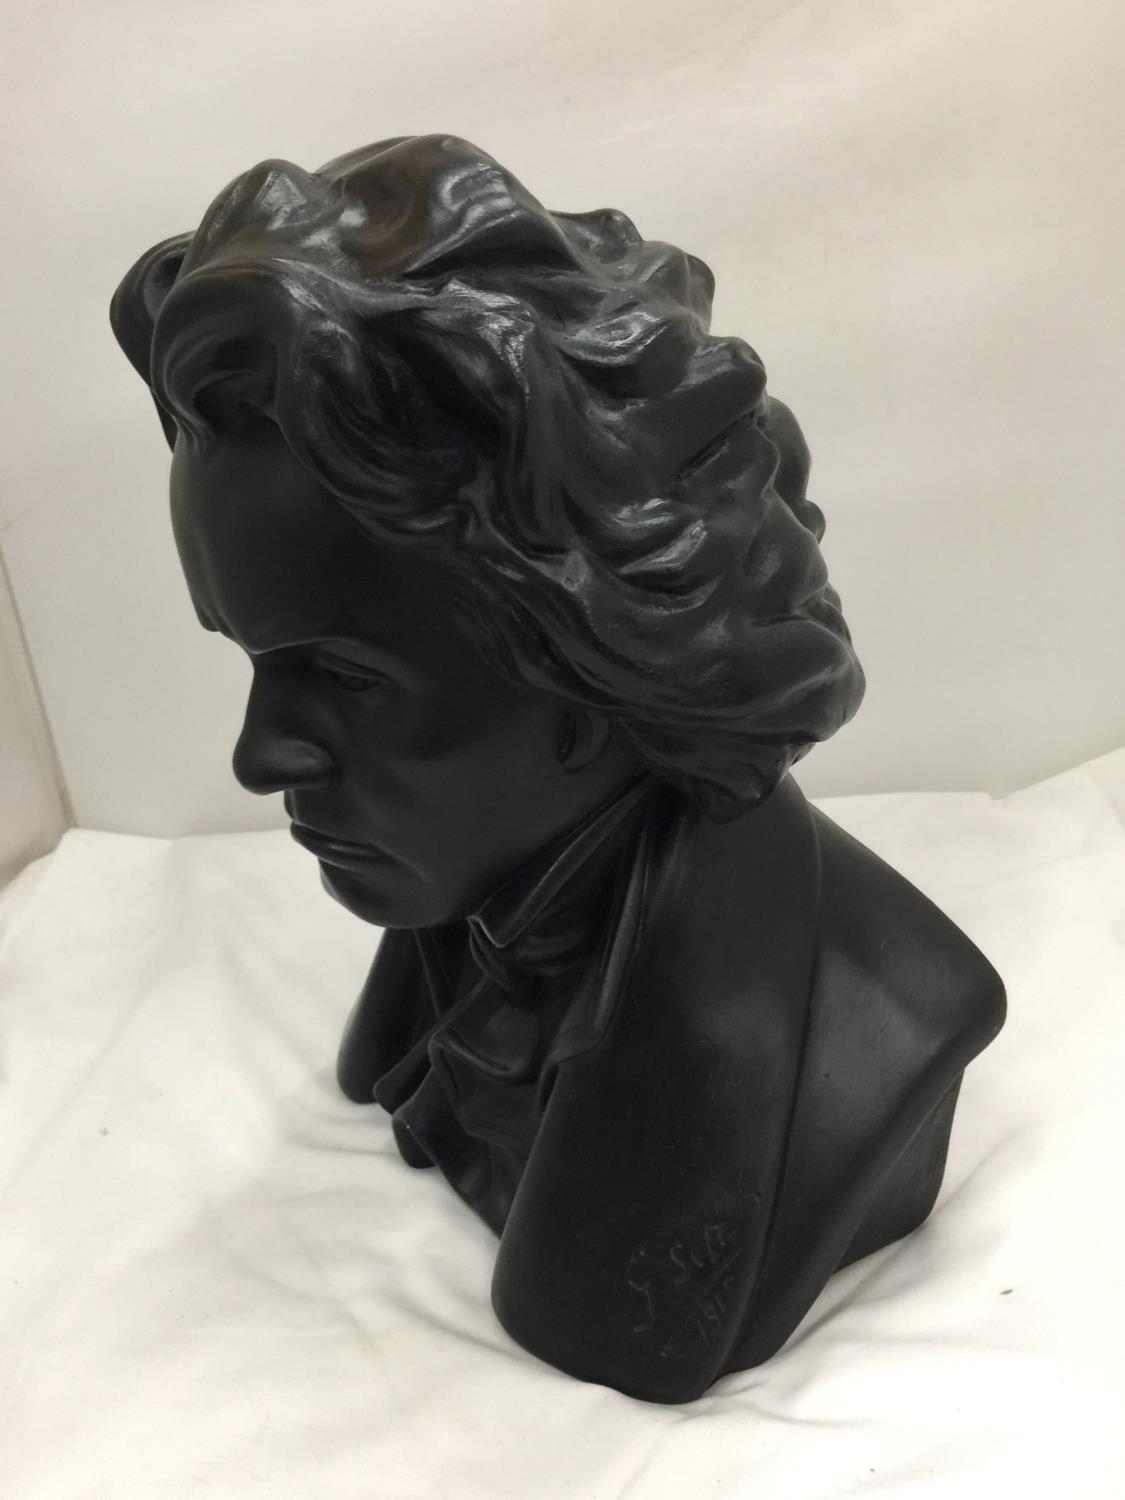 A HEAVY BUST OF BEETHOVEN ENGRAVED WITH SIGNATURE G. SETT 1915 H: 38CM - Image 3 of 5